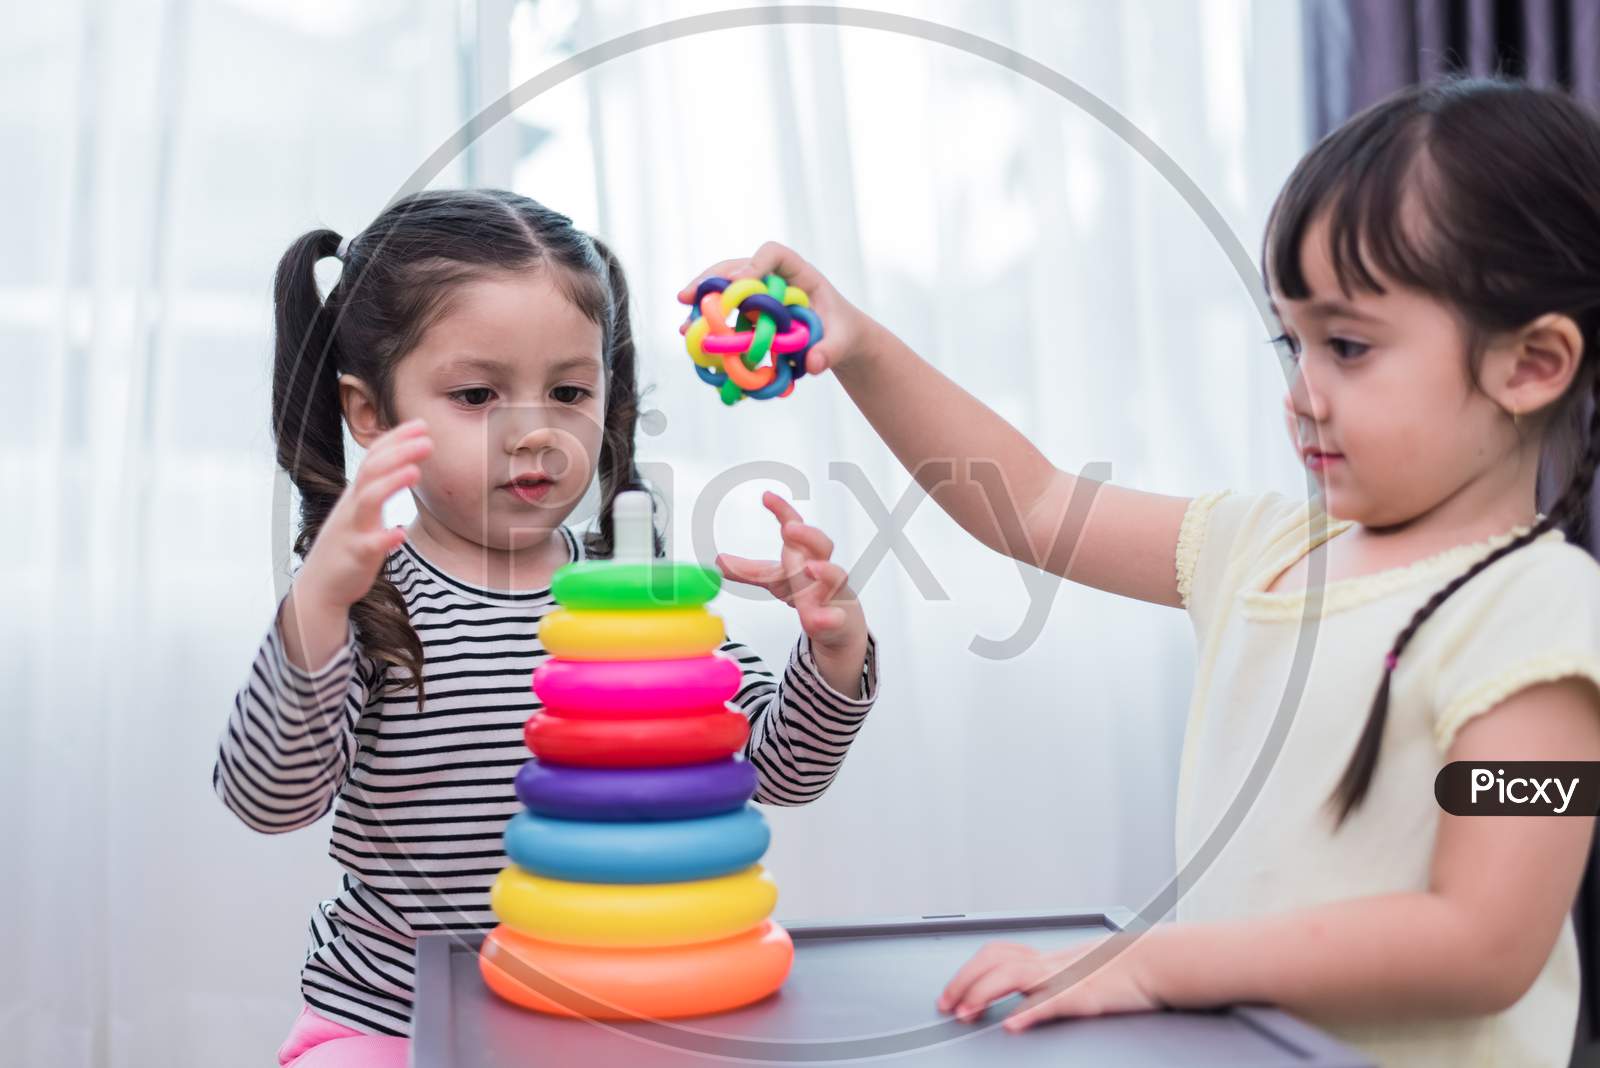 Two Little Girls Playing Small Toy Balls In Home Together. Education And Happiness Lifestyle Concept. Funny Learning And Children Development Theme. Smile Faces